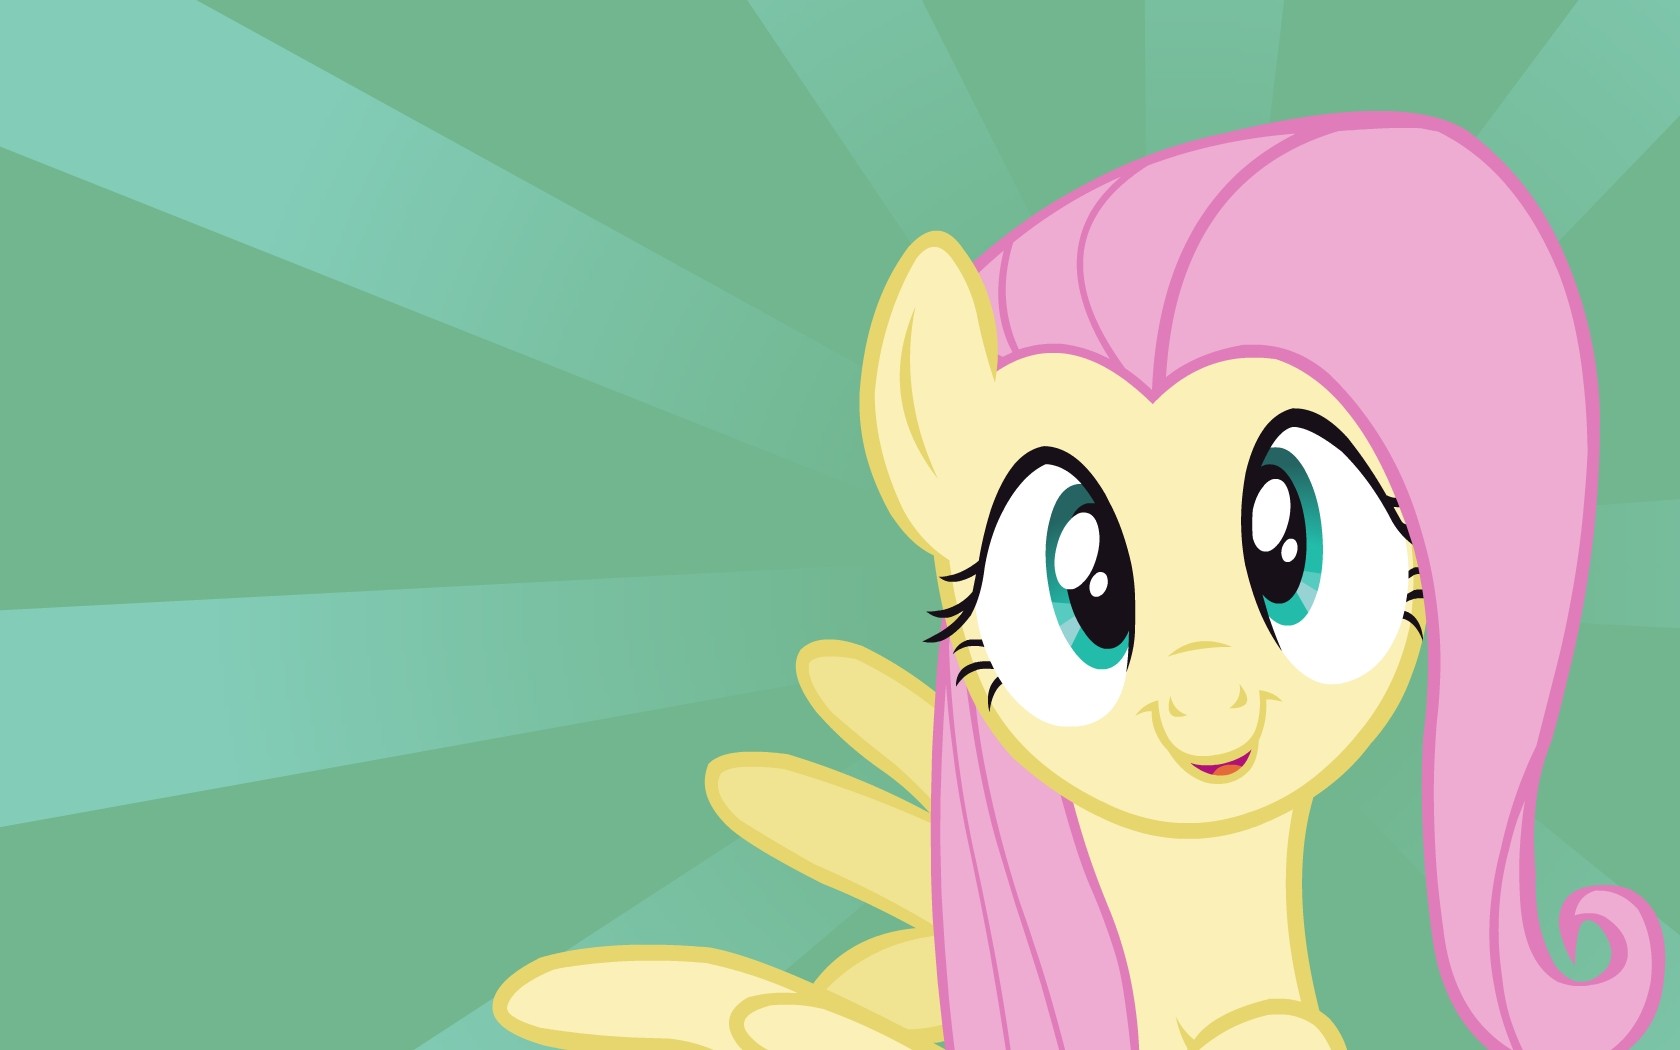 pegasus, My, Little, Pony, Fluttershy, Bronies, Green, Background, My, Little, Pony , Friendship, Is, Magic Wallpaper